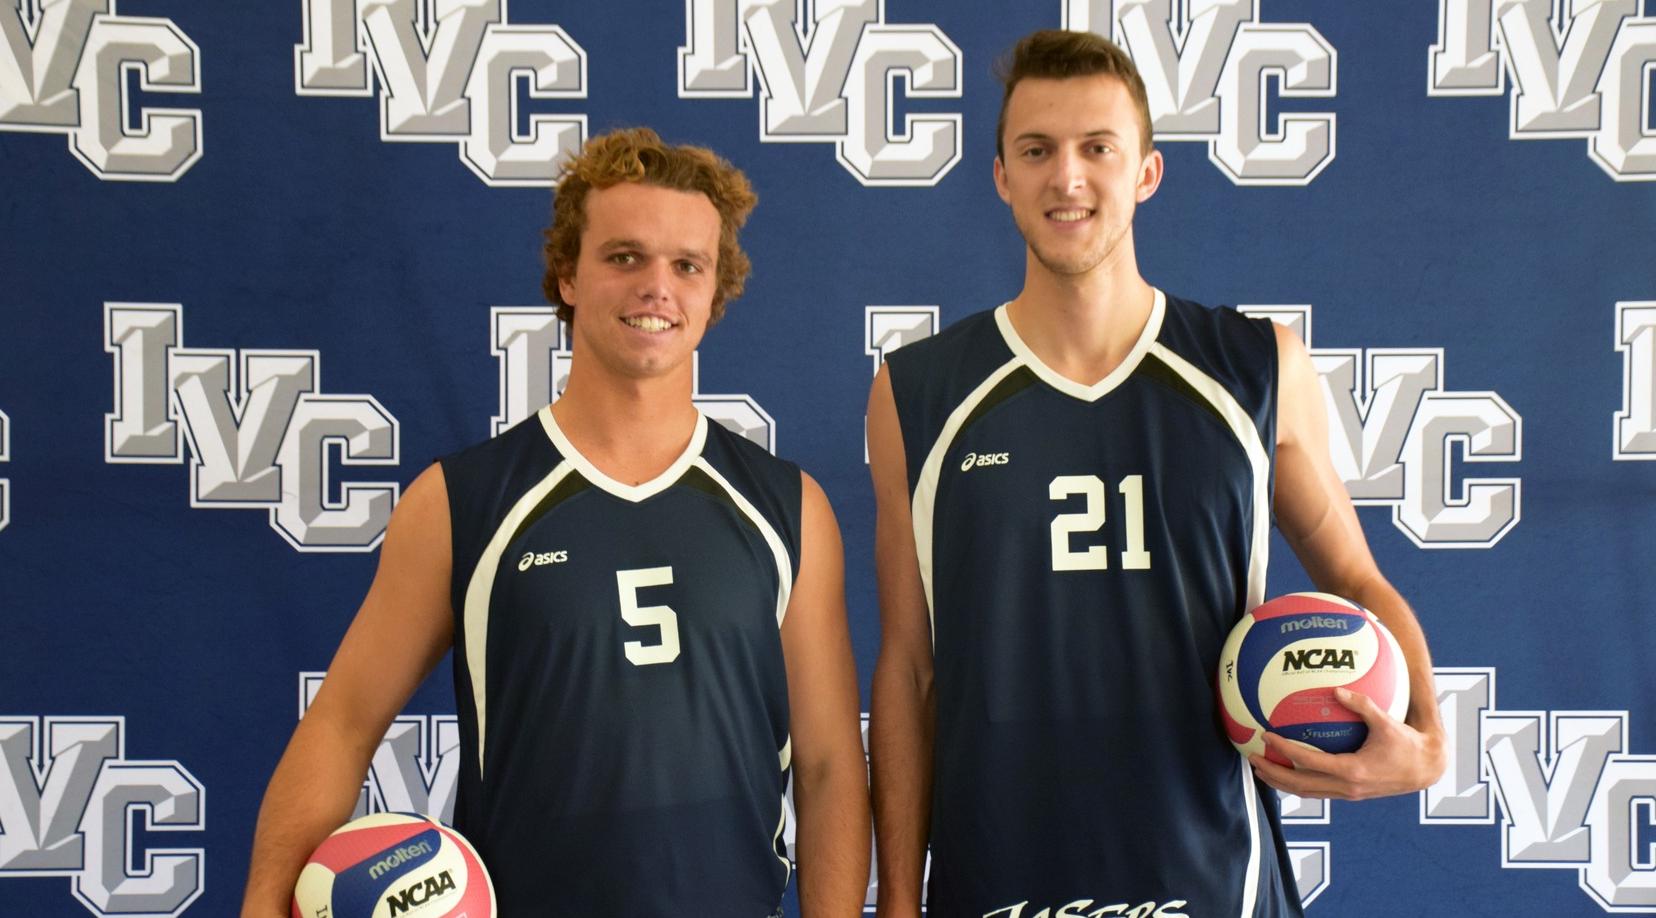 Four men's volleyball players named to all-conference squads